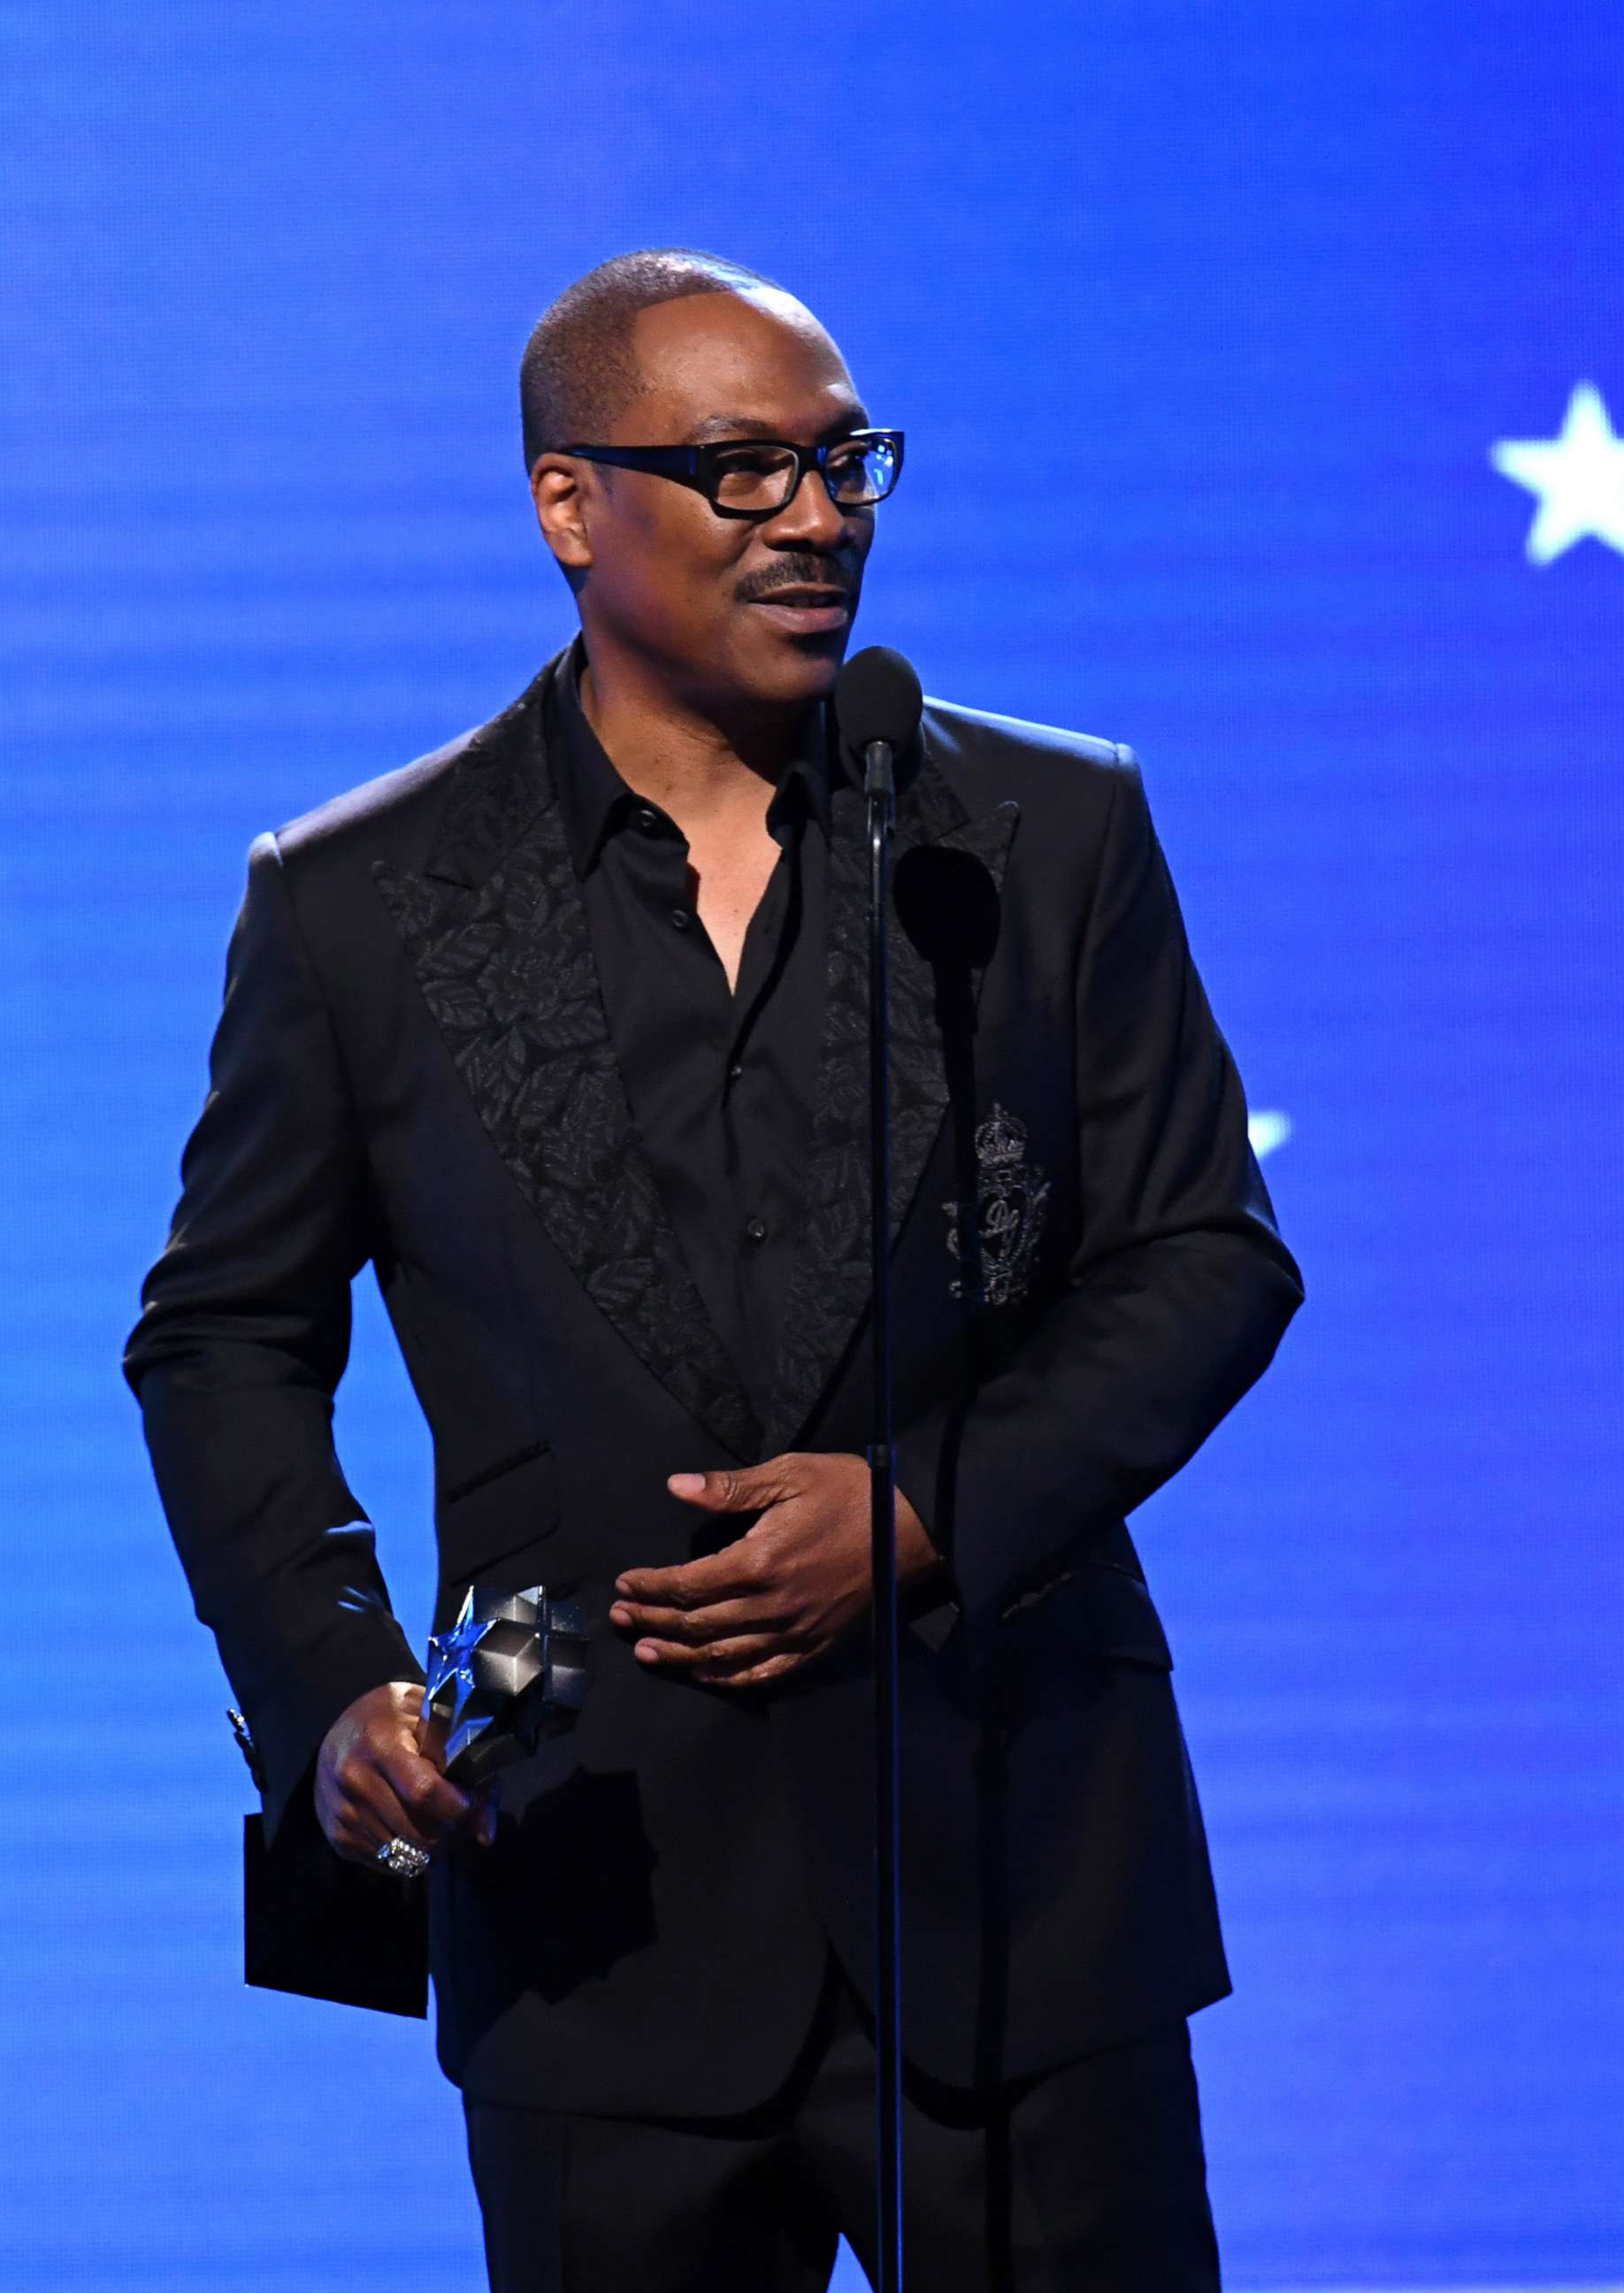 PHOTO: Eddie Murphy accepts the Lifetime Achievement Award onstage during the 25th Annual Critics' Choice Awards at Barker Hangar on Jan. 12, 2020 in Santa Monica, Calif.